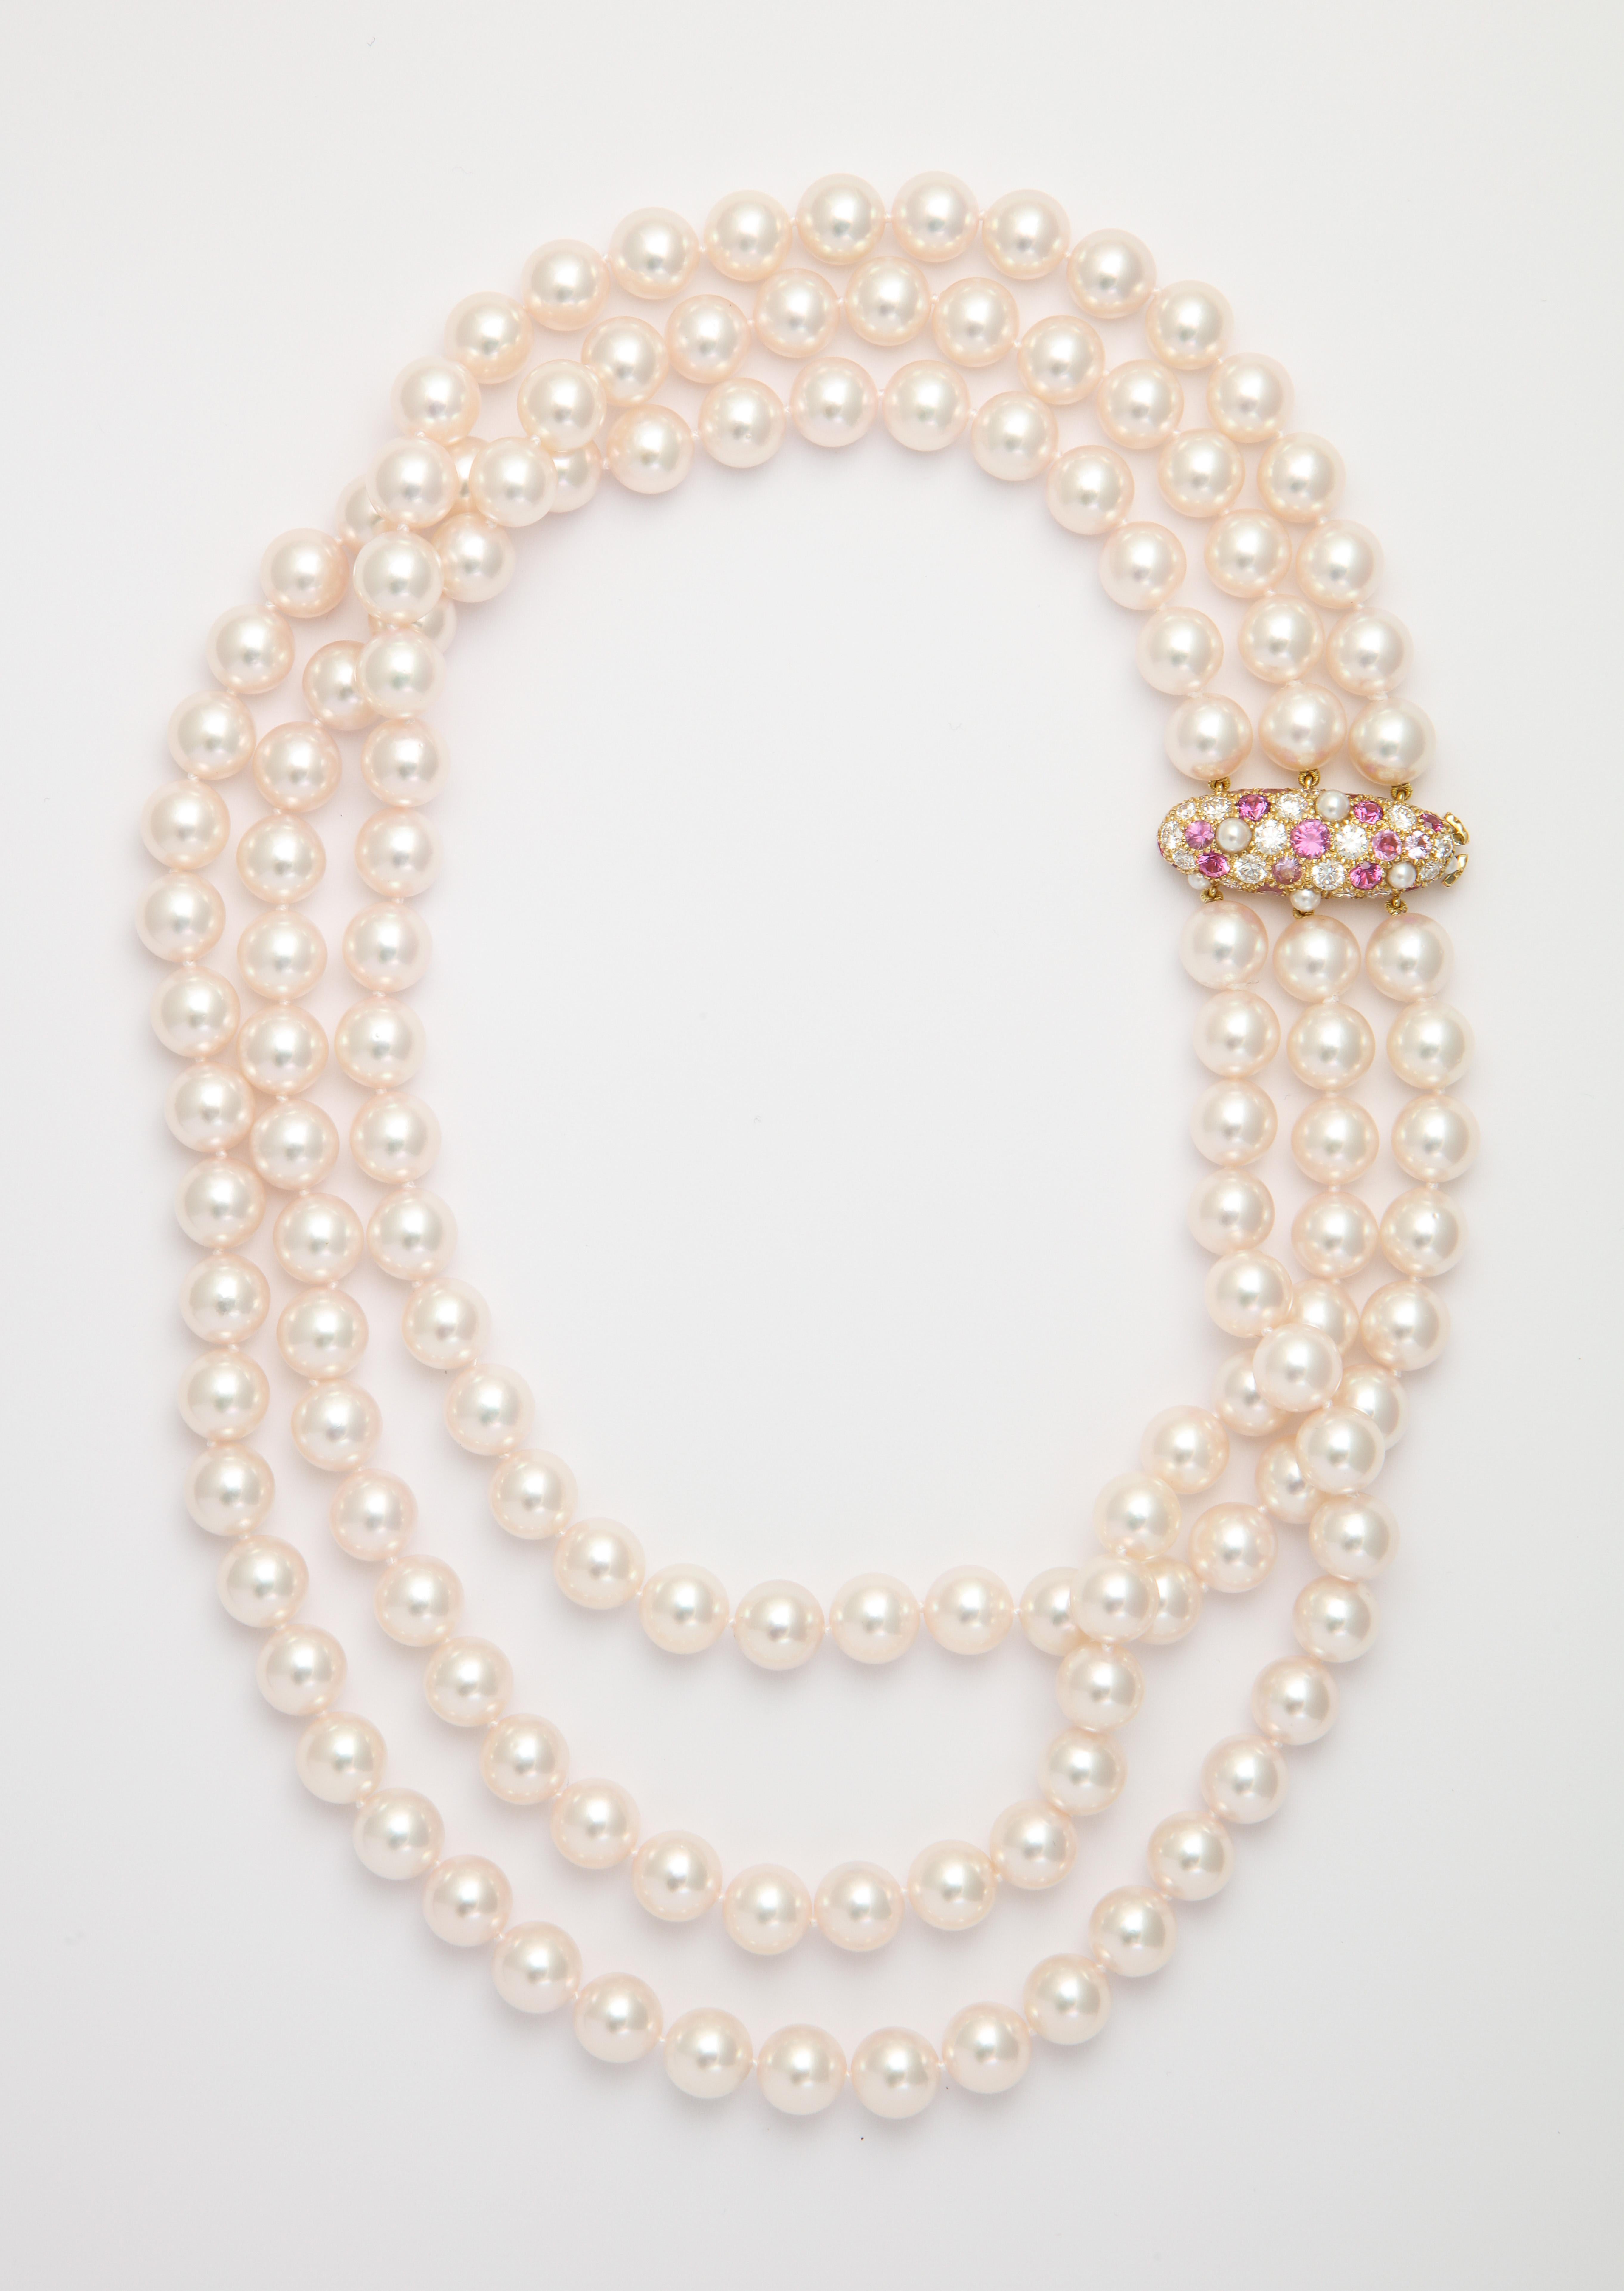 What may have started with Breakfast at Tiffany's is still hot with today's sophisticated woman. This iconic pearl collar is made even more feminine by the use of a handmade custom-designed clasp to play off the rich pinkish hue of the white